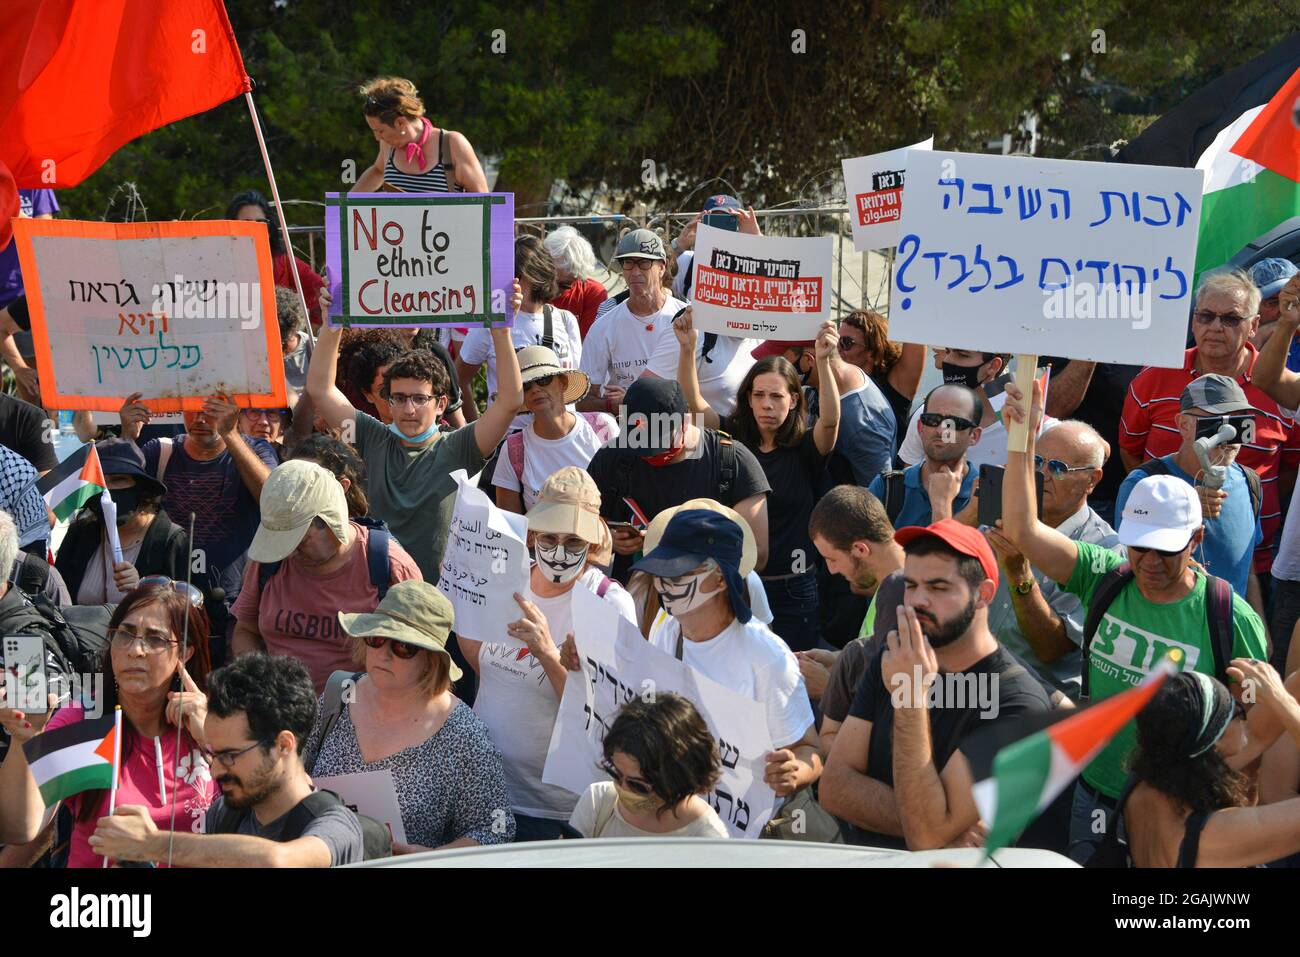 Jerusalem, Israel. 30th July, 2021. Israeli Palestenian solidarity protest against the deportation in Sheikh Jarrah, towards the legal discussion on the neighborhood residents' appeal in Israel's High Court Of Justice in upcoming Monday. Sheikh Jarach, Jerusalem. Israel / Palestine. 30th Jul 2021.(Photo by Matan Golan/Alamy Live News) Credit: Matan Golan/Alamy Live News Stock Photo